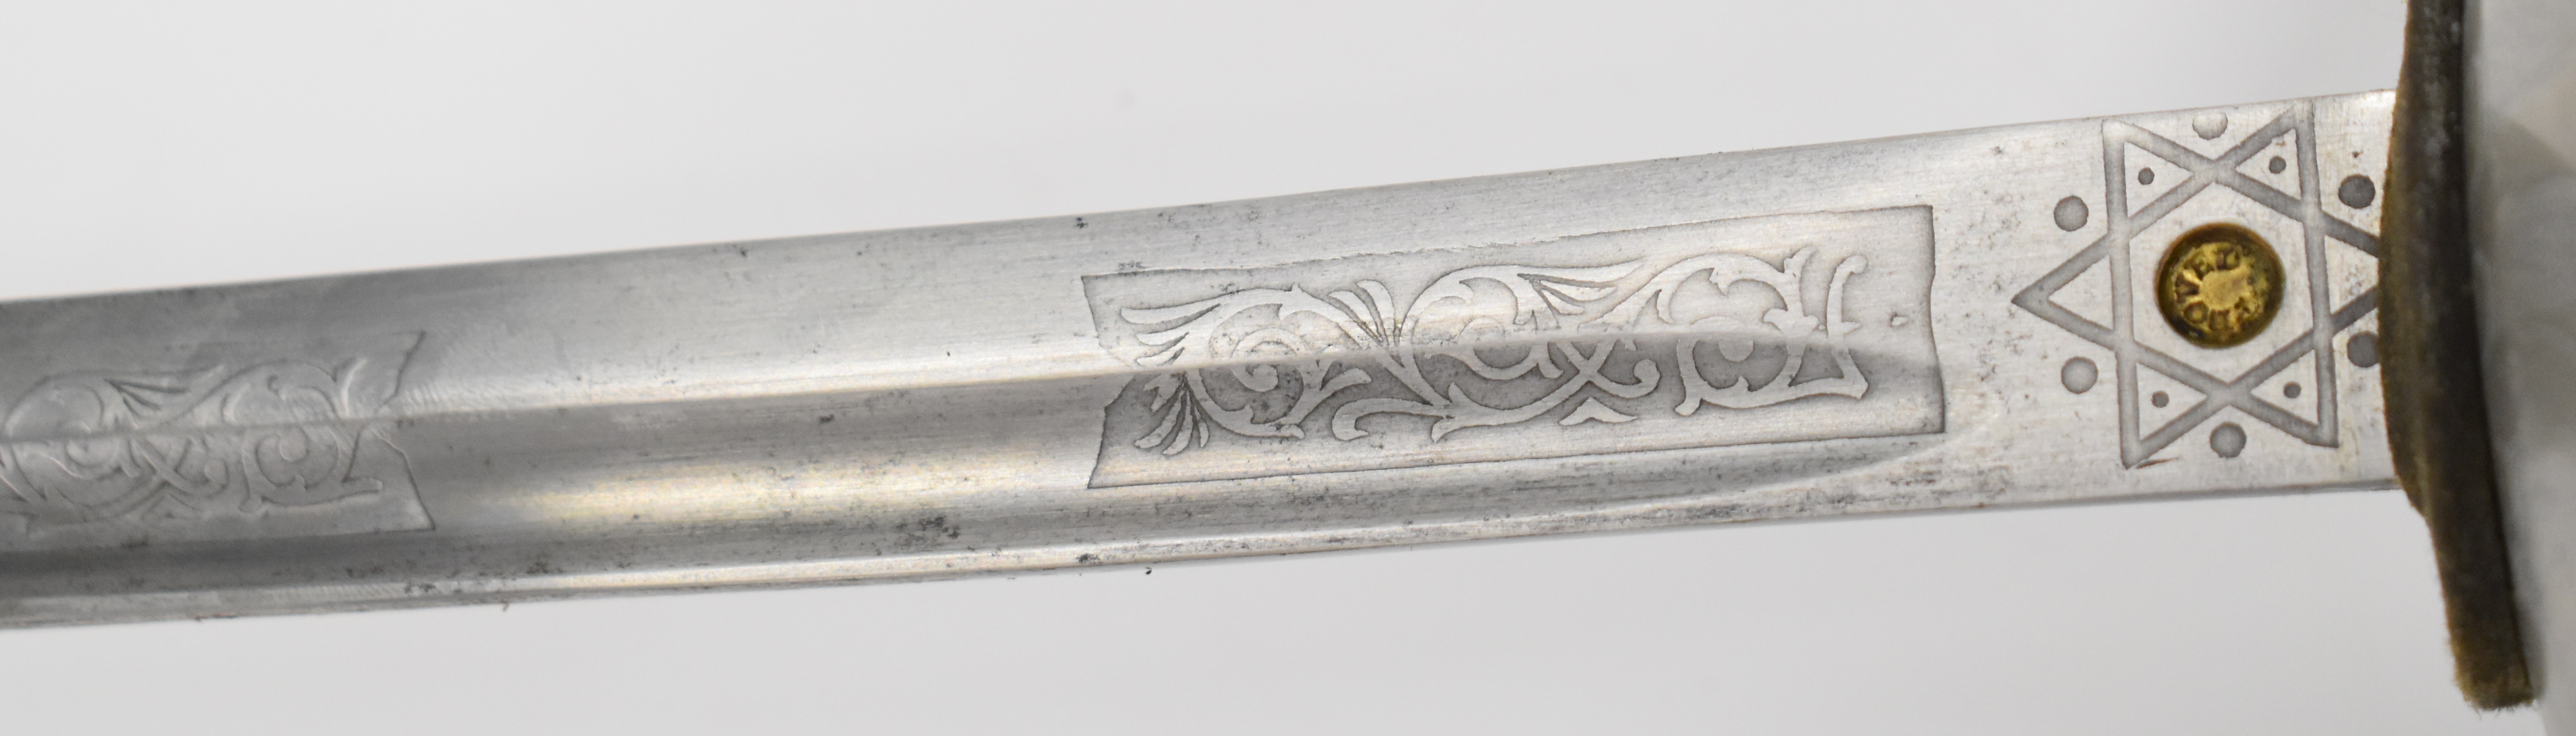 British Army 1912 pattern Cavalry officer's sword with decorated bowl guard, Humphreys & Crook, - Image 6 of 8